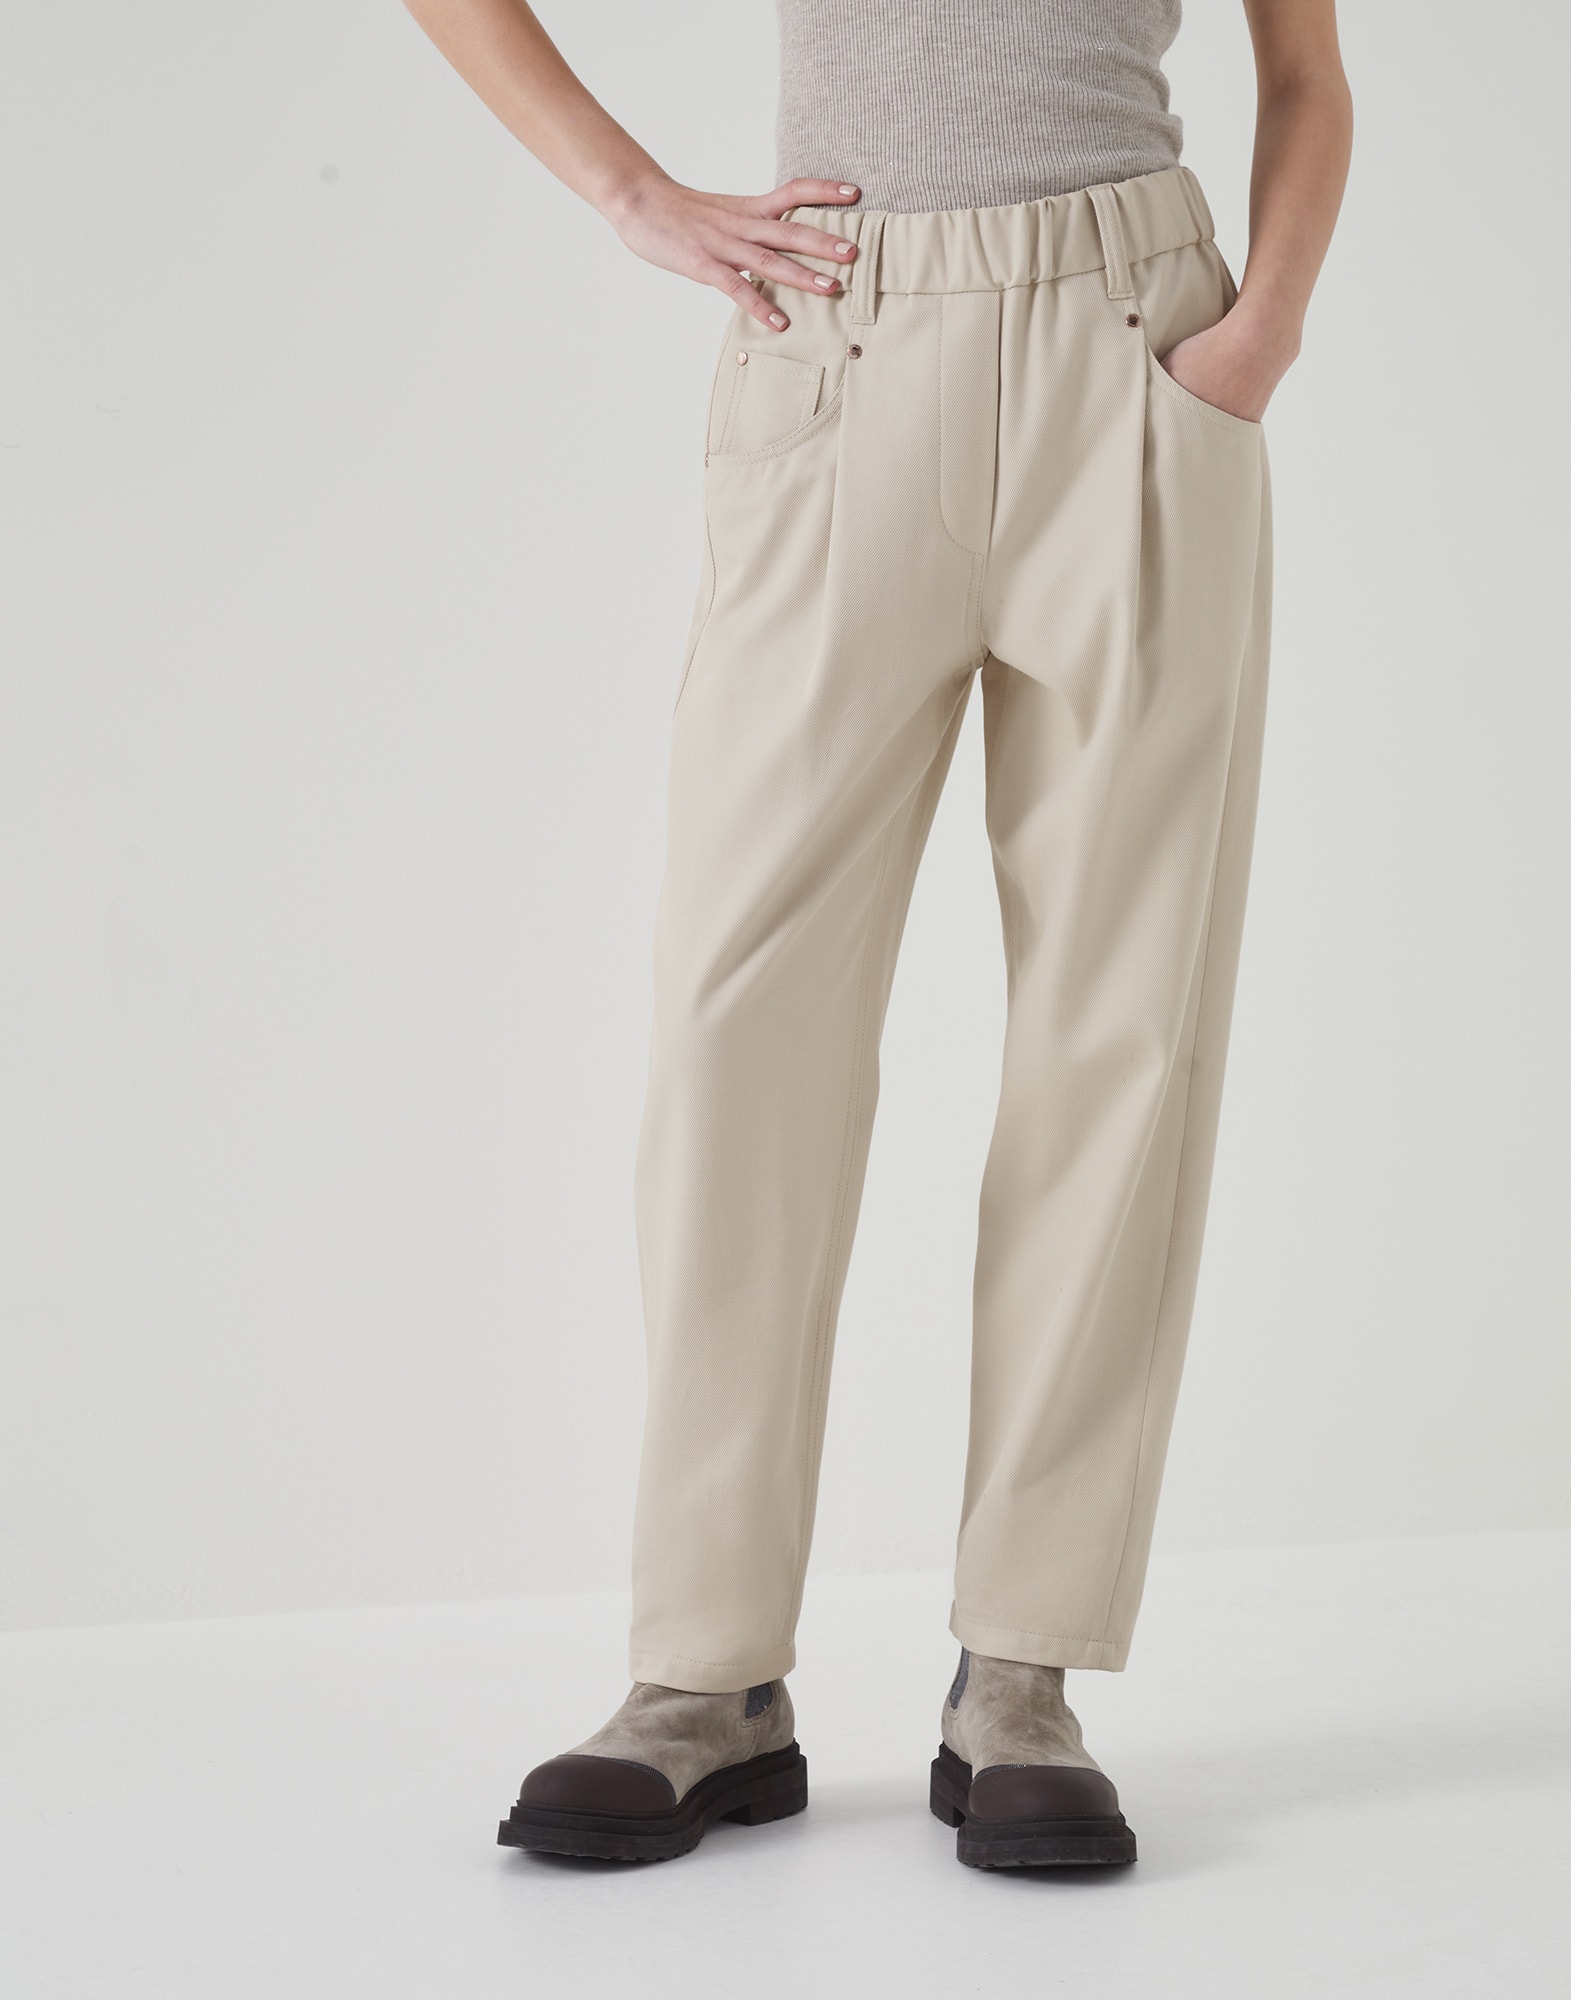 HTNBO Mens Baggy Cotton Pants with Pockets Cargo India | Ubuy